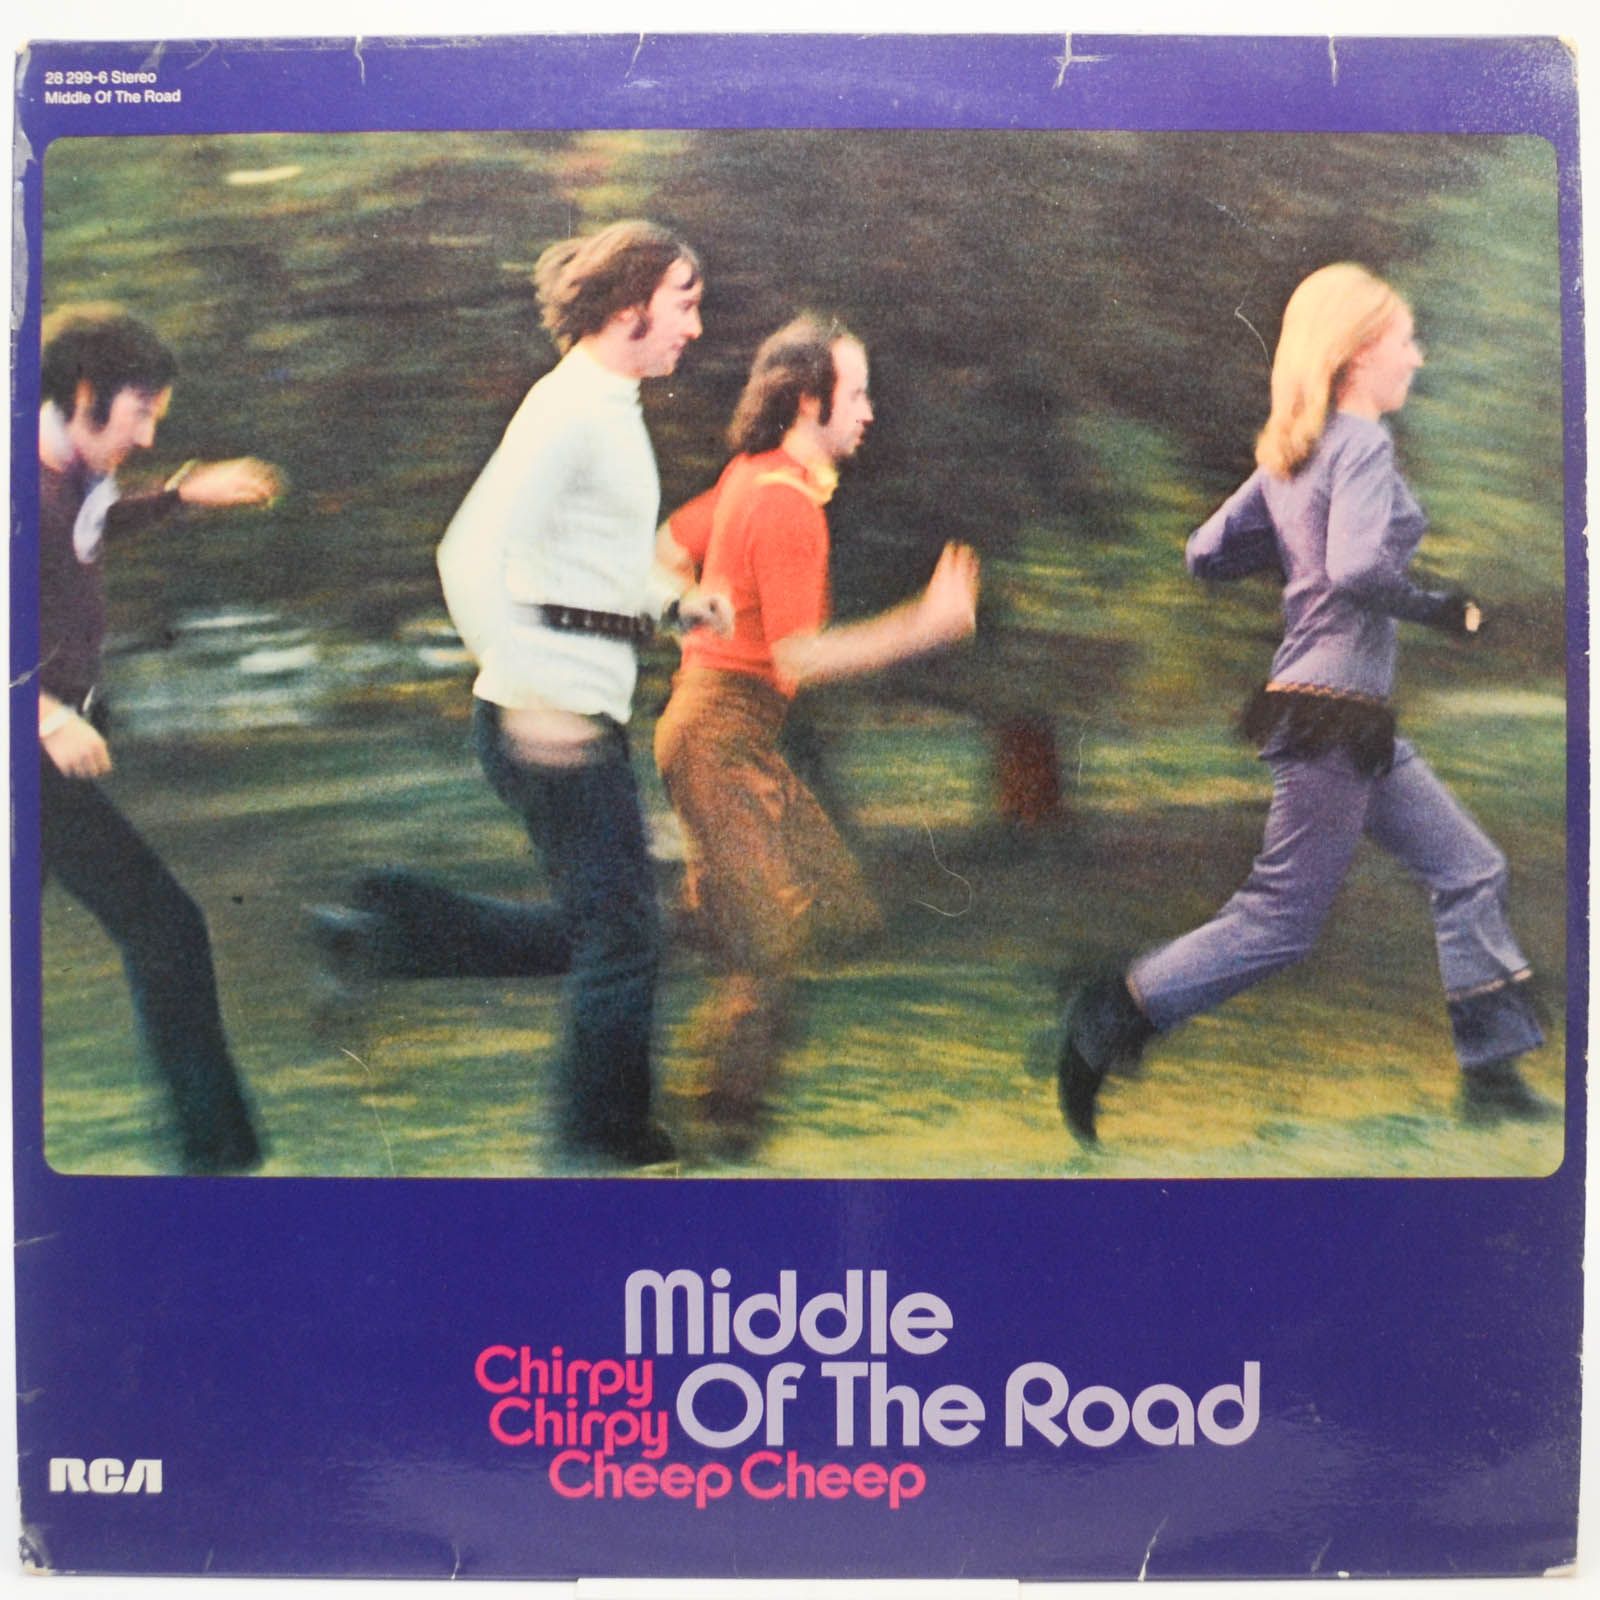 Middle Of The Road — Chirpy Chirpy Cheep Cheep, 1971